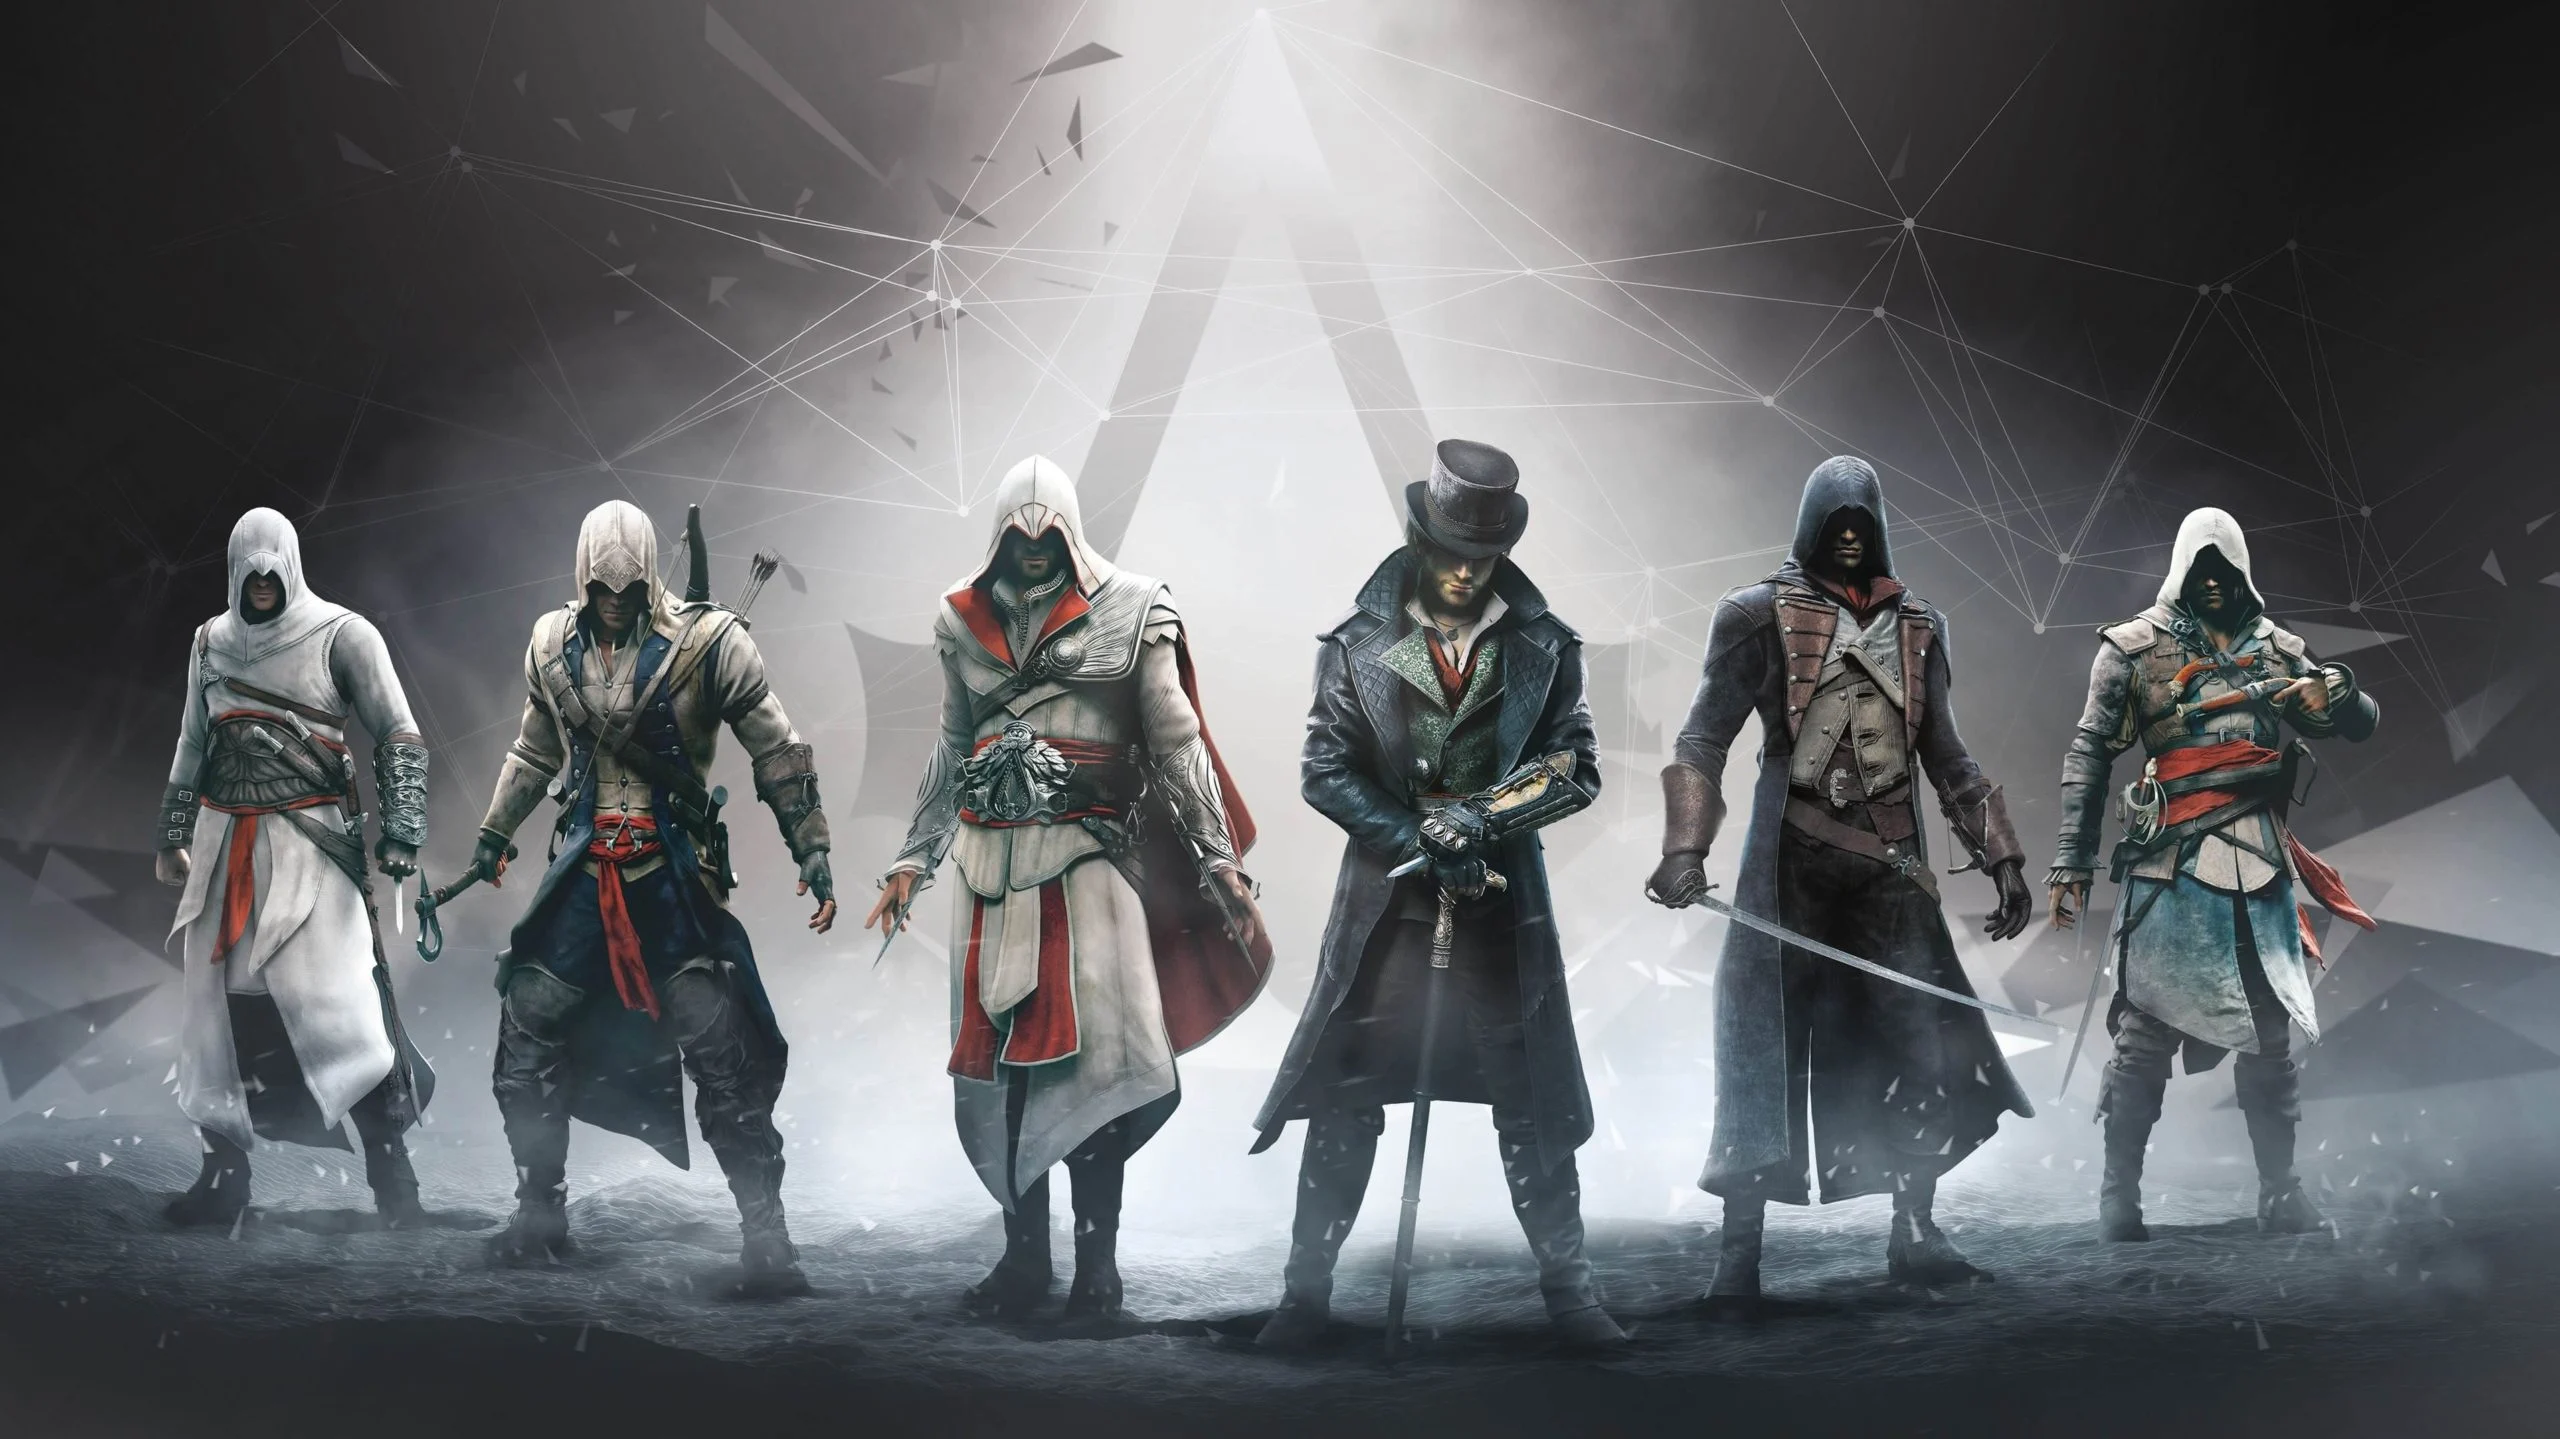 Assassin's Creed: other new titles in development according to a rumor